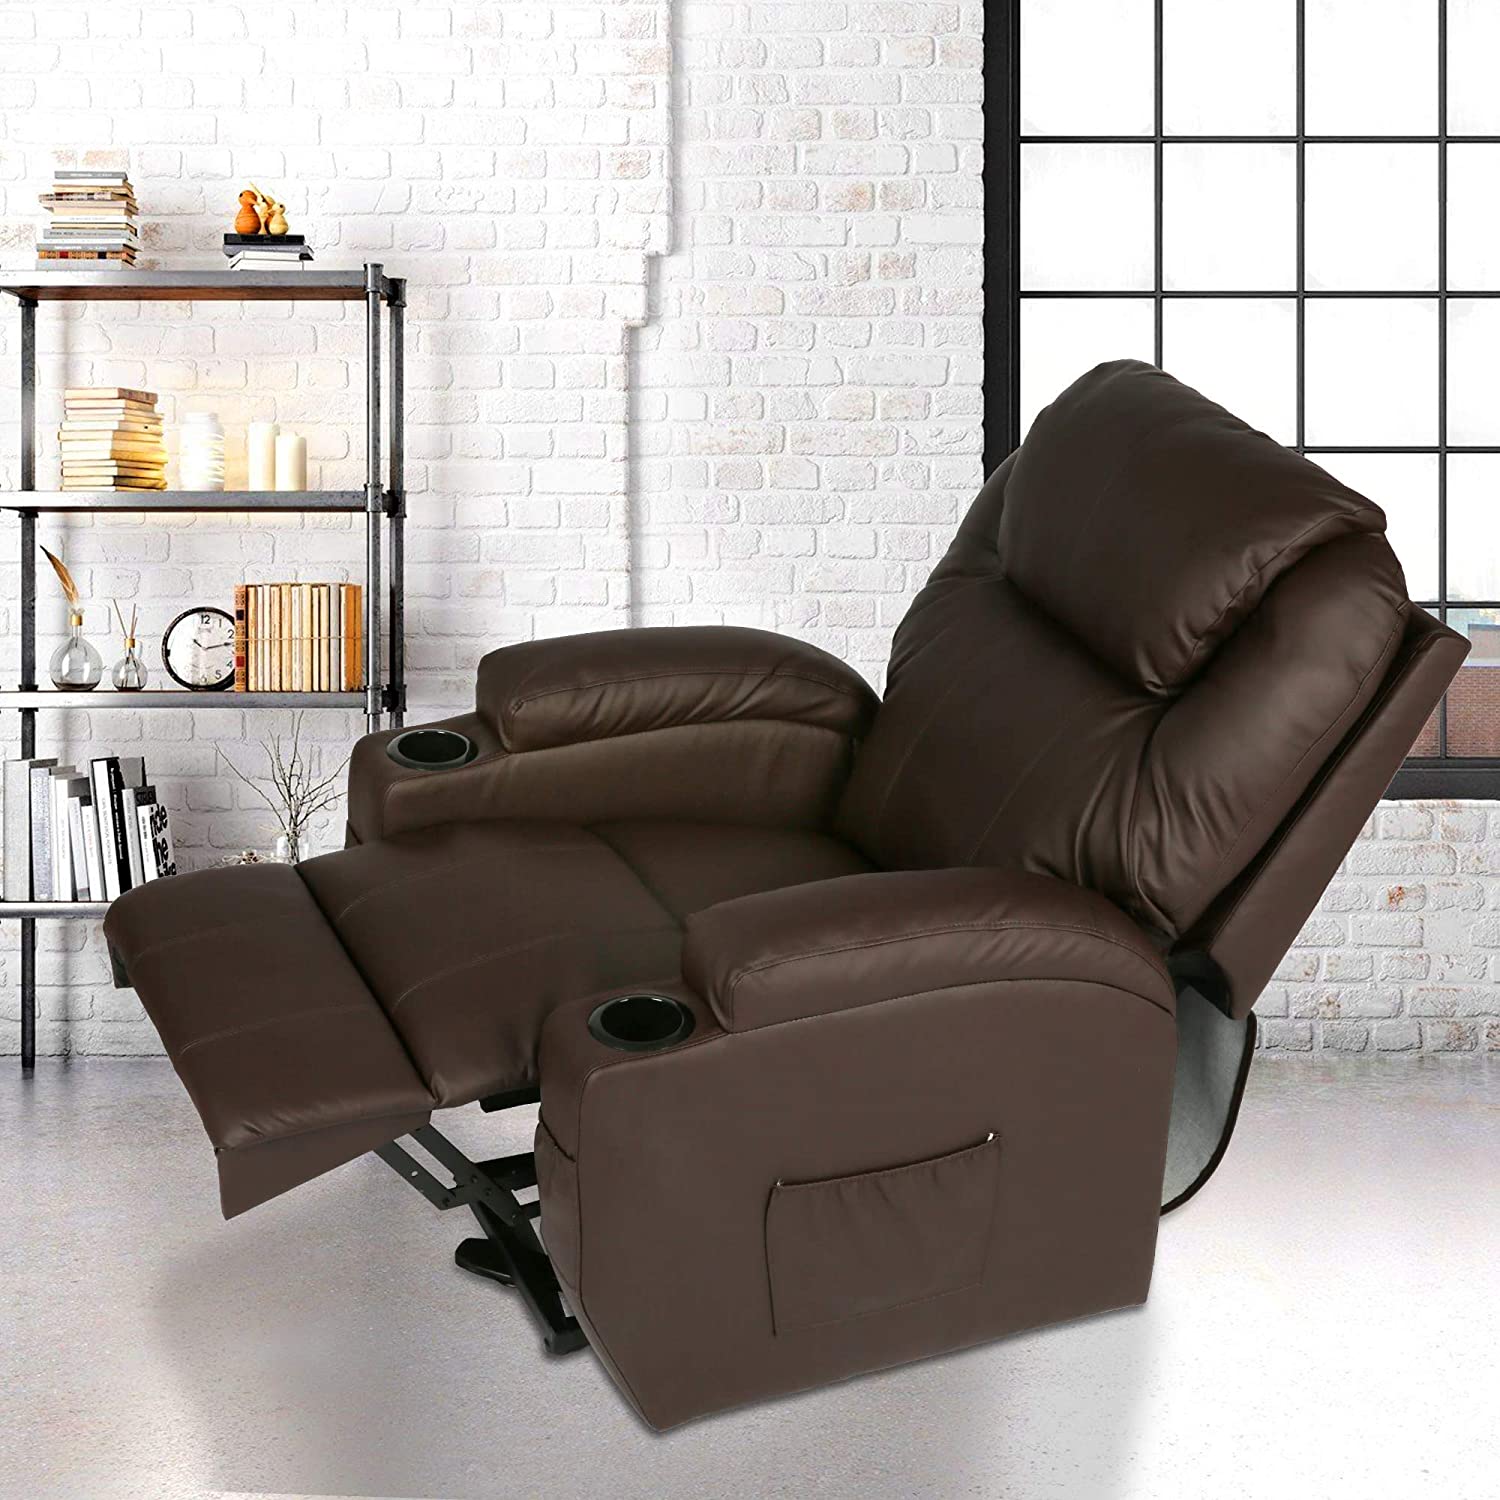 Power Lift Electric Recliner Chair with Heated Vibration Massage for Elderly People Adjustable Theater Recliner Sofa Furniture with Massage Remote Control for Living Room Bedroom,Brown